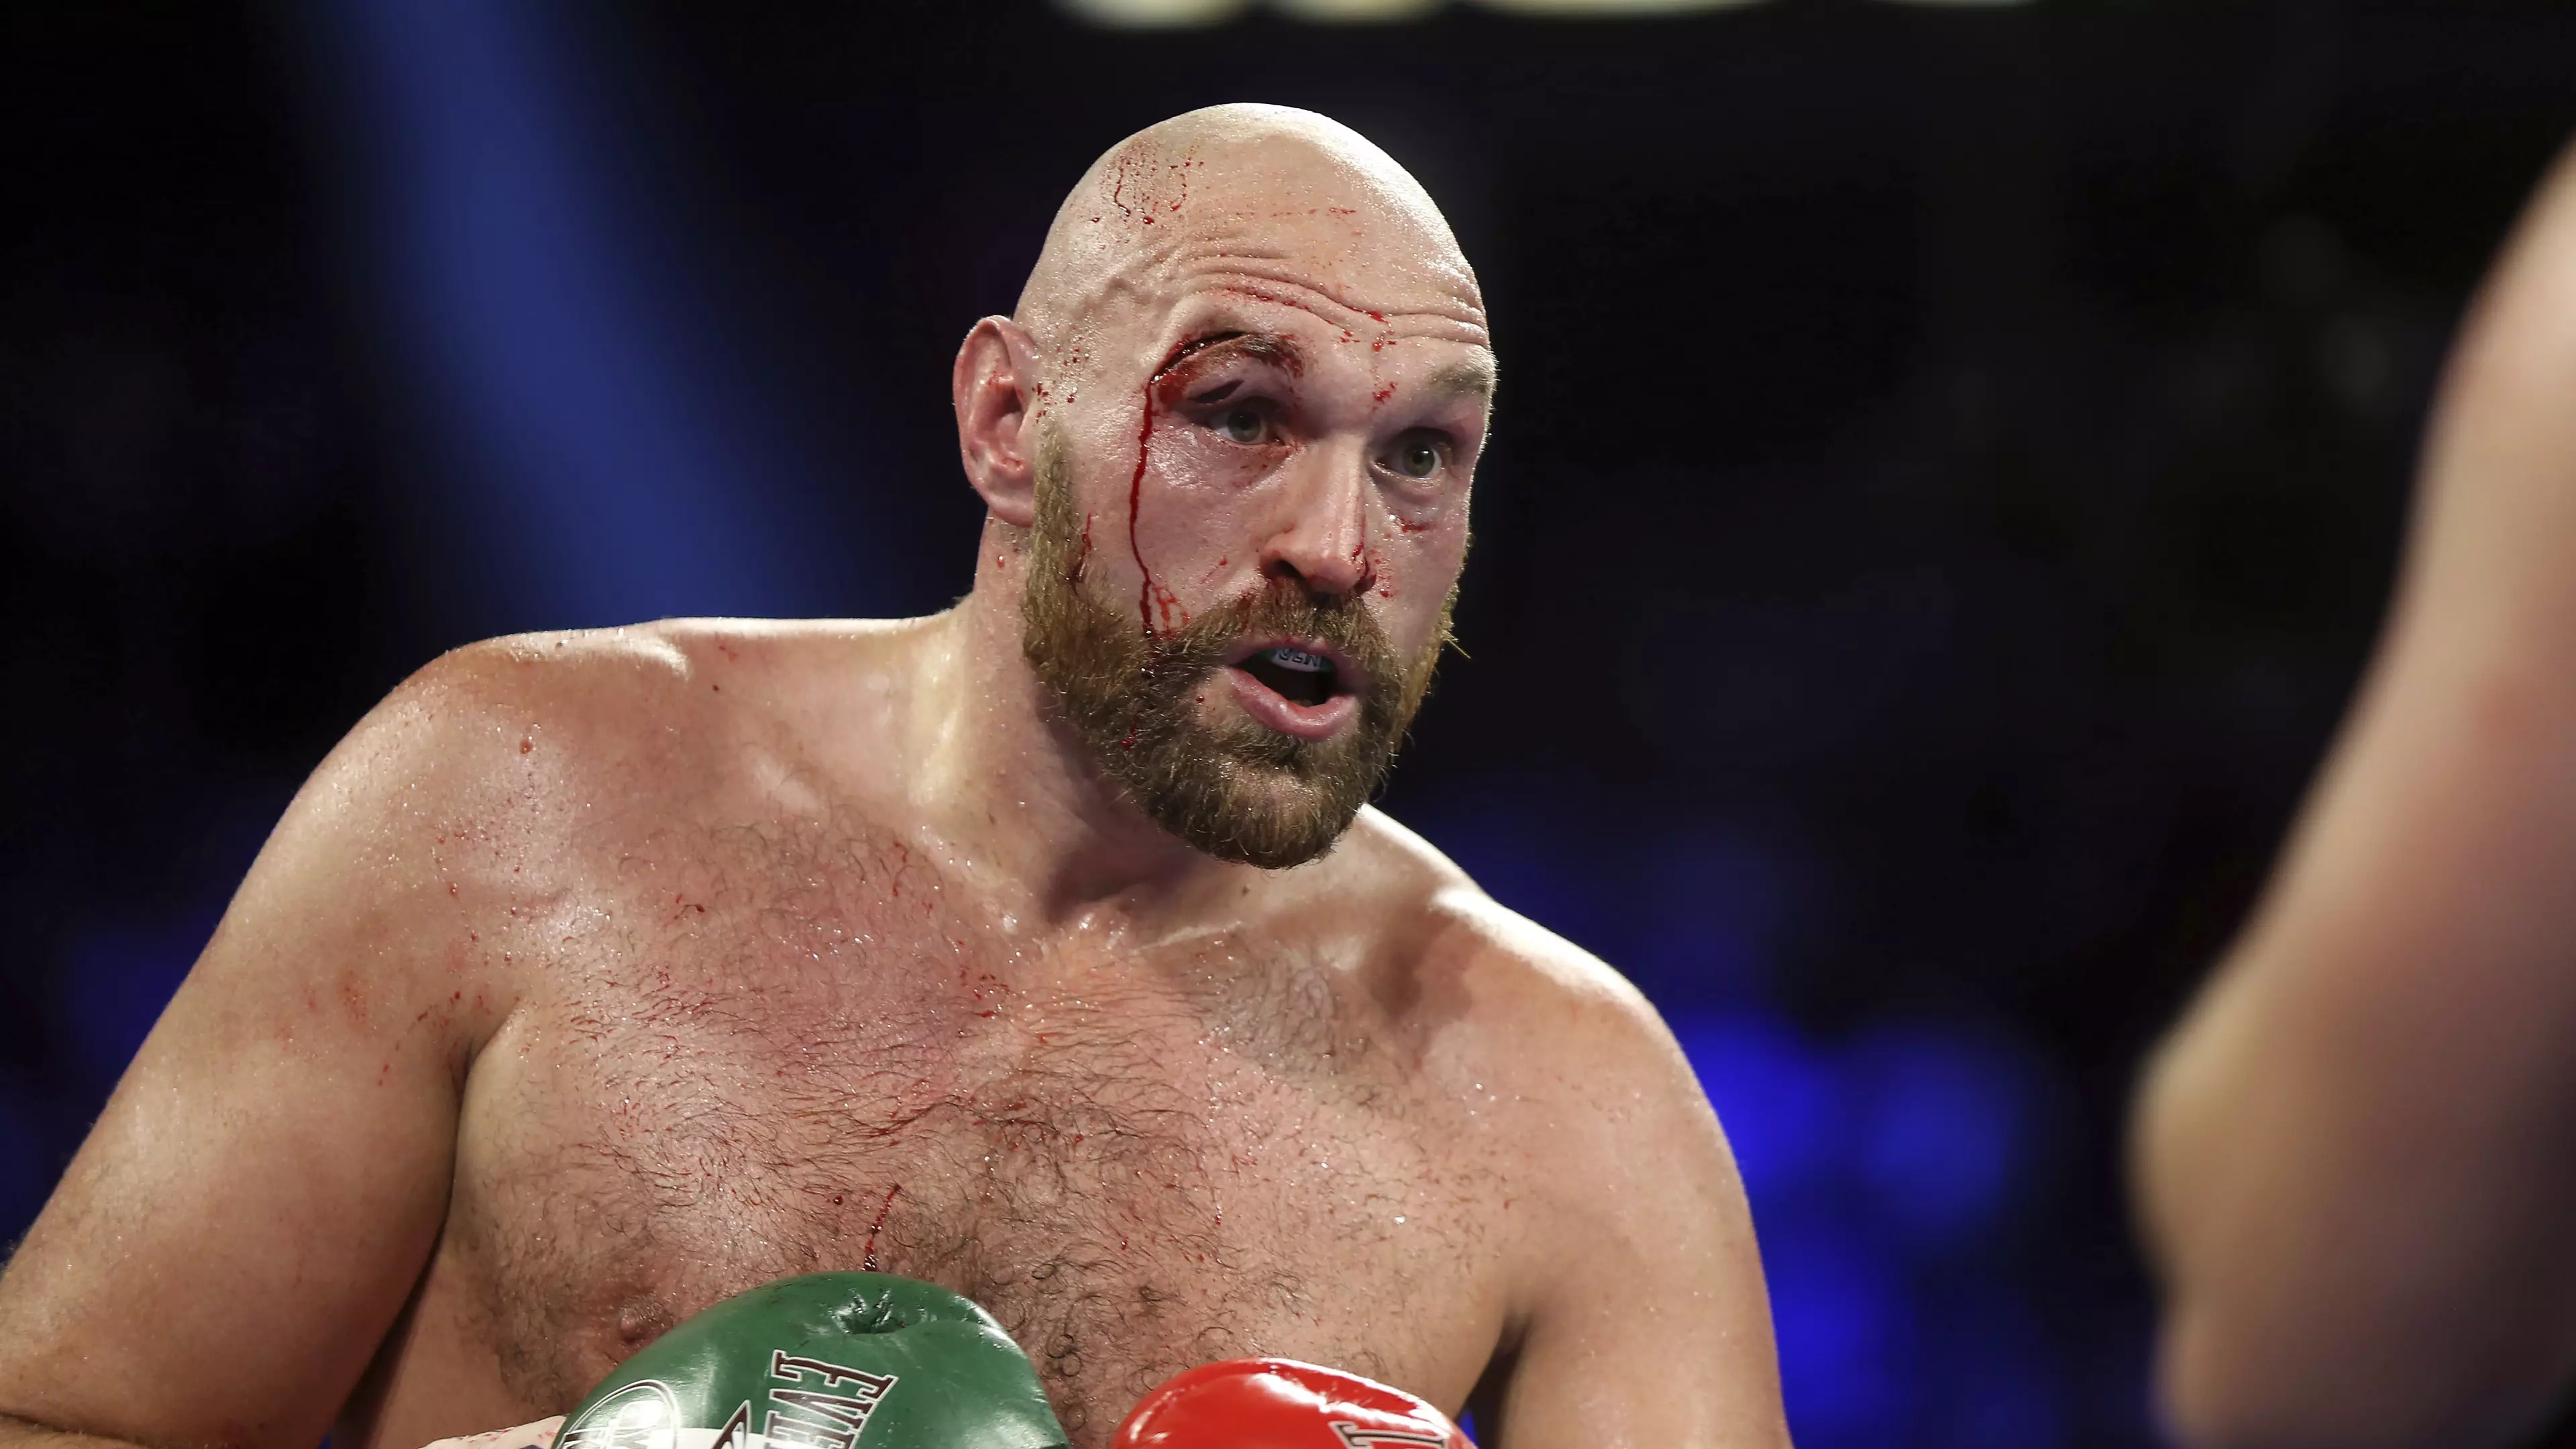 Tyson Fury could need plastic surgery to help heal his deep cuts